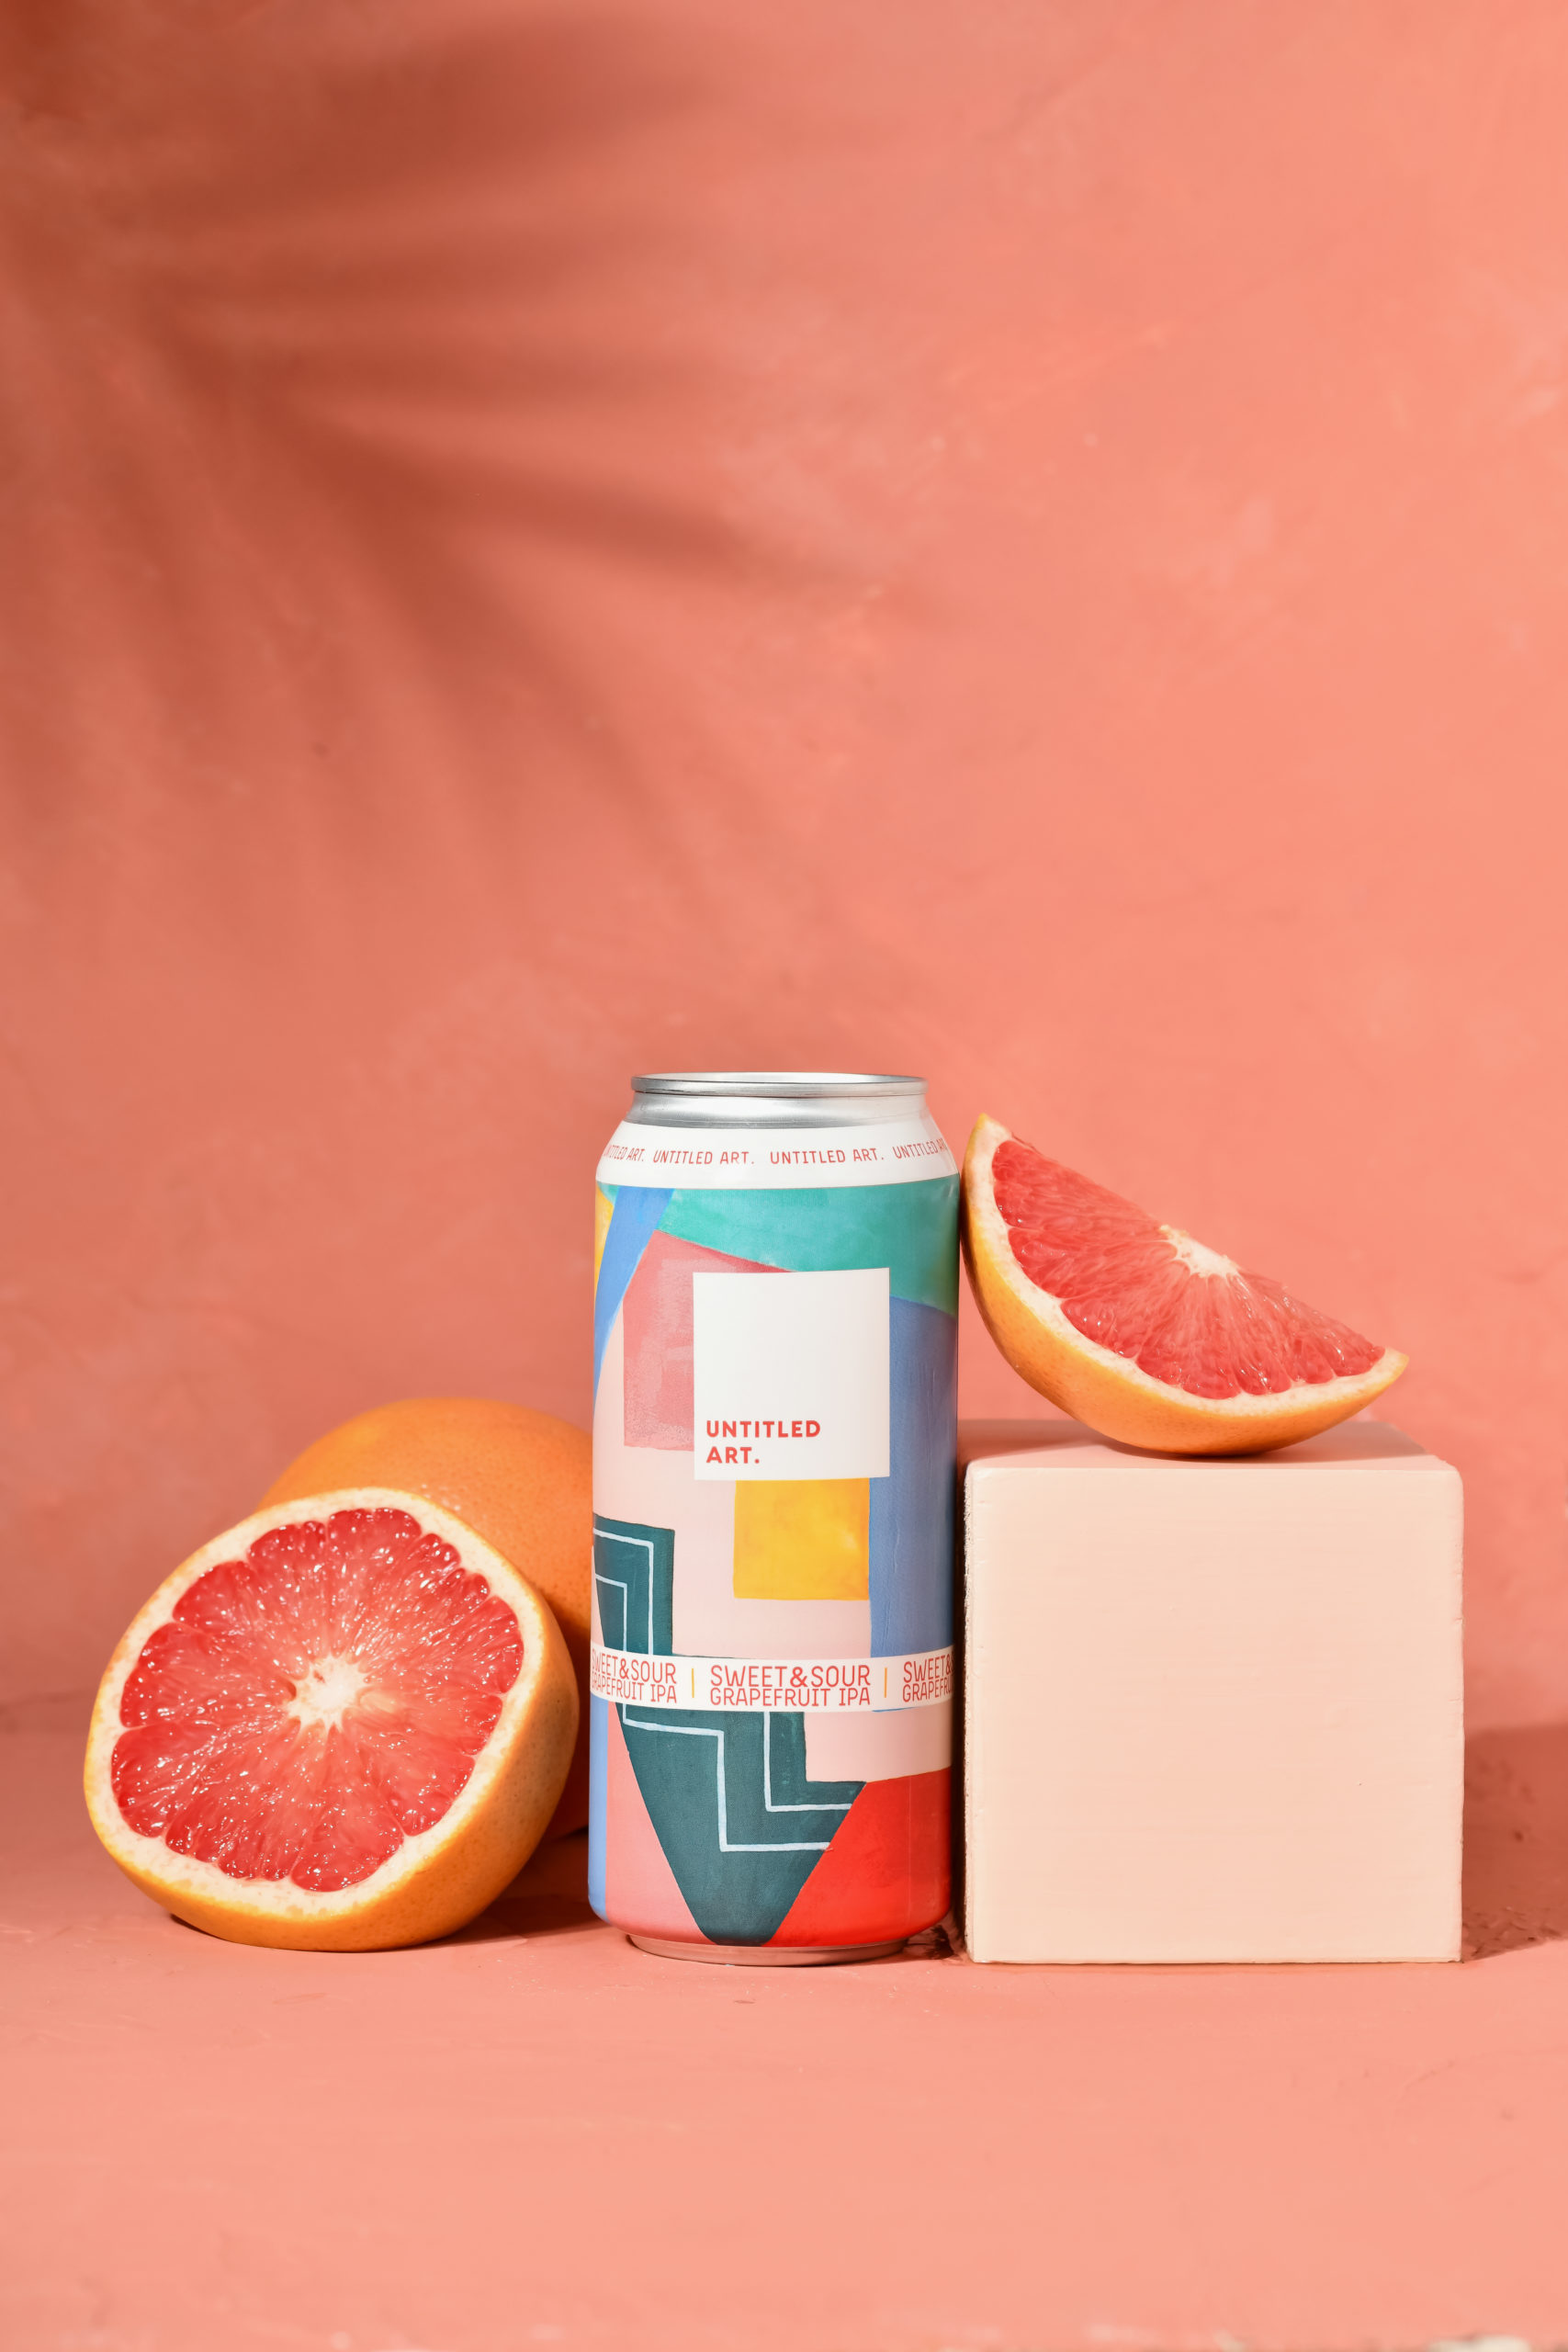 A can of grapefruit beer on a pink background.